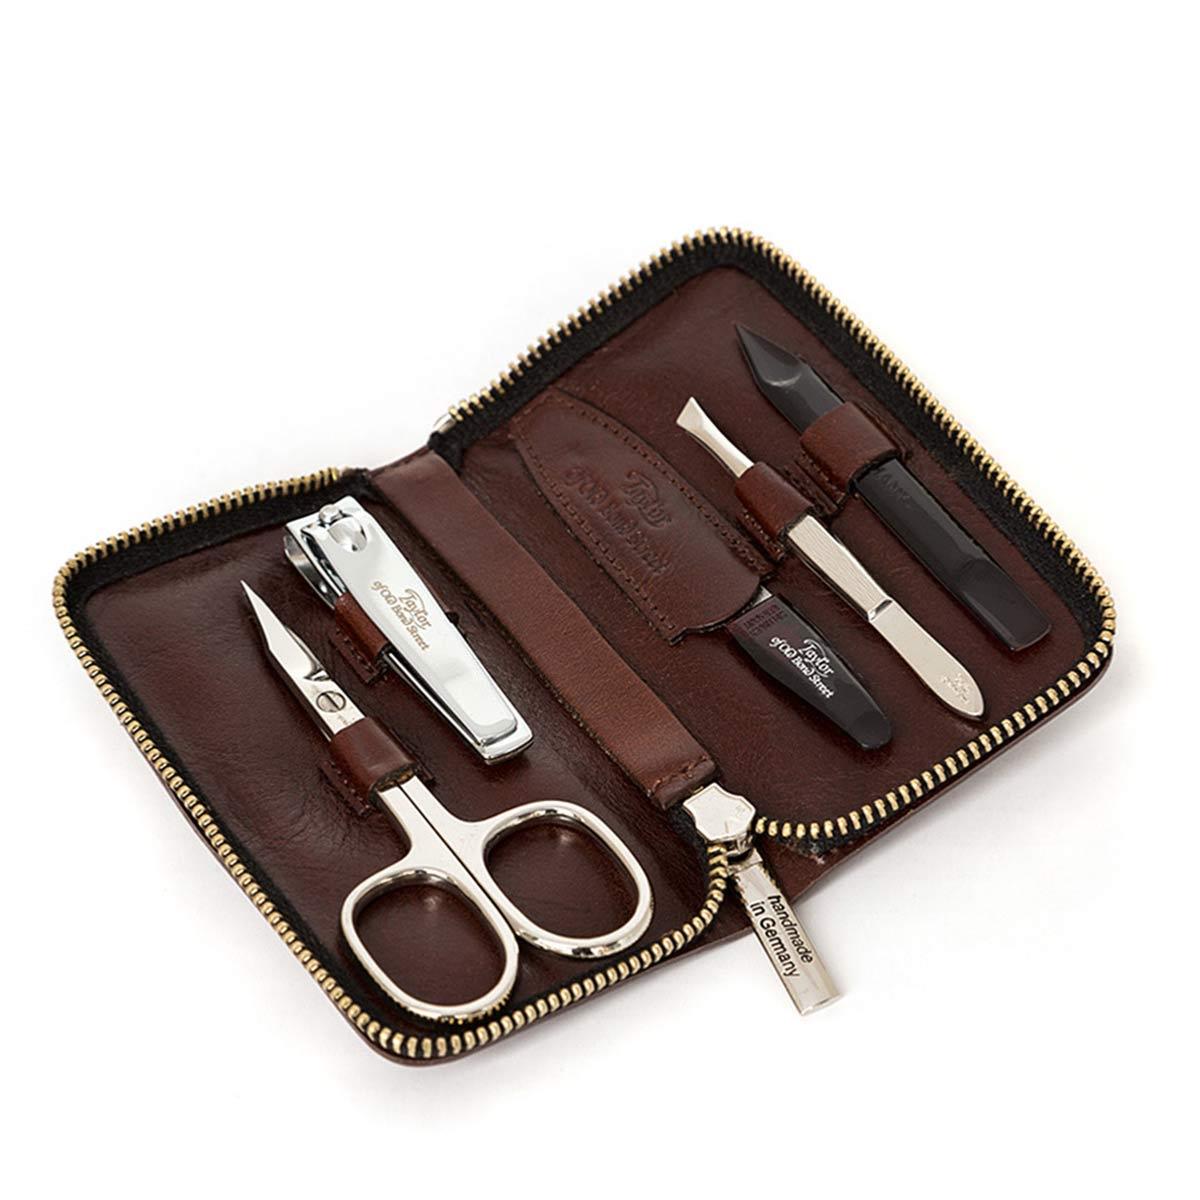 Primary image of Brown Leather Manicure Set